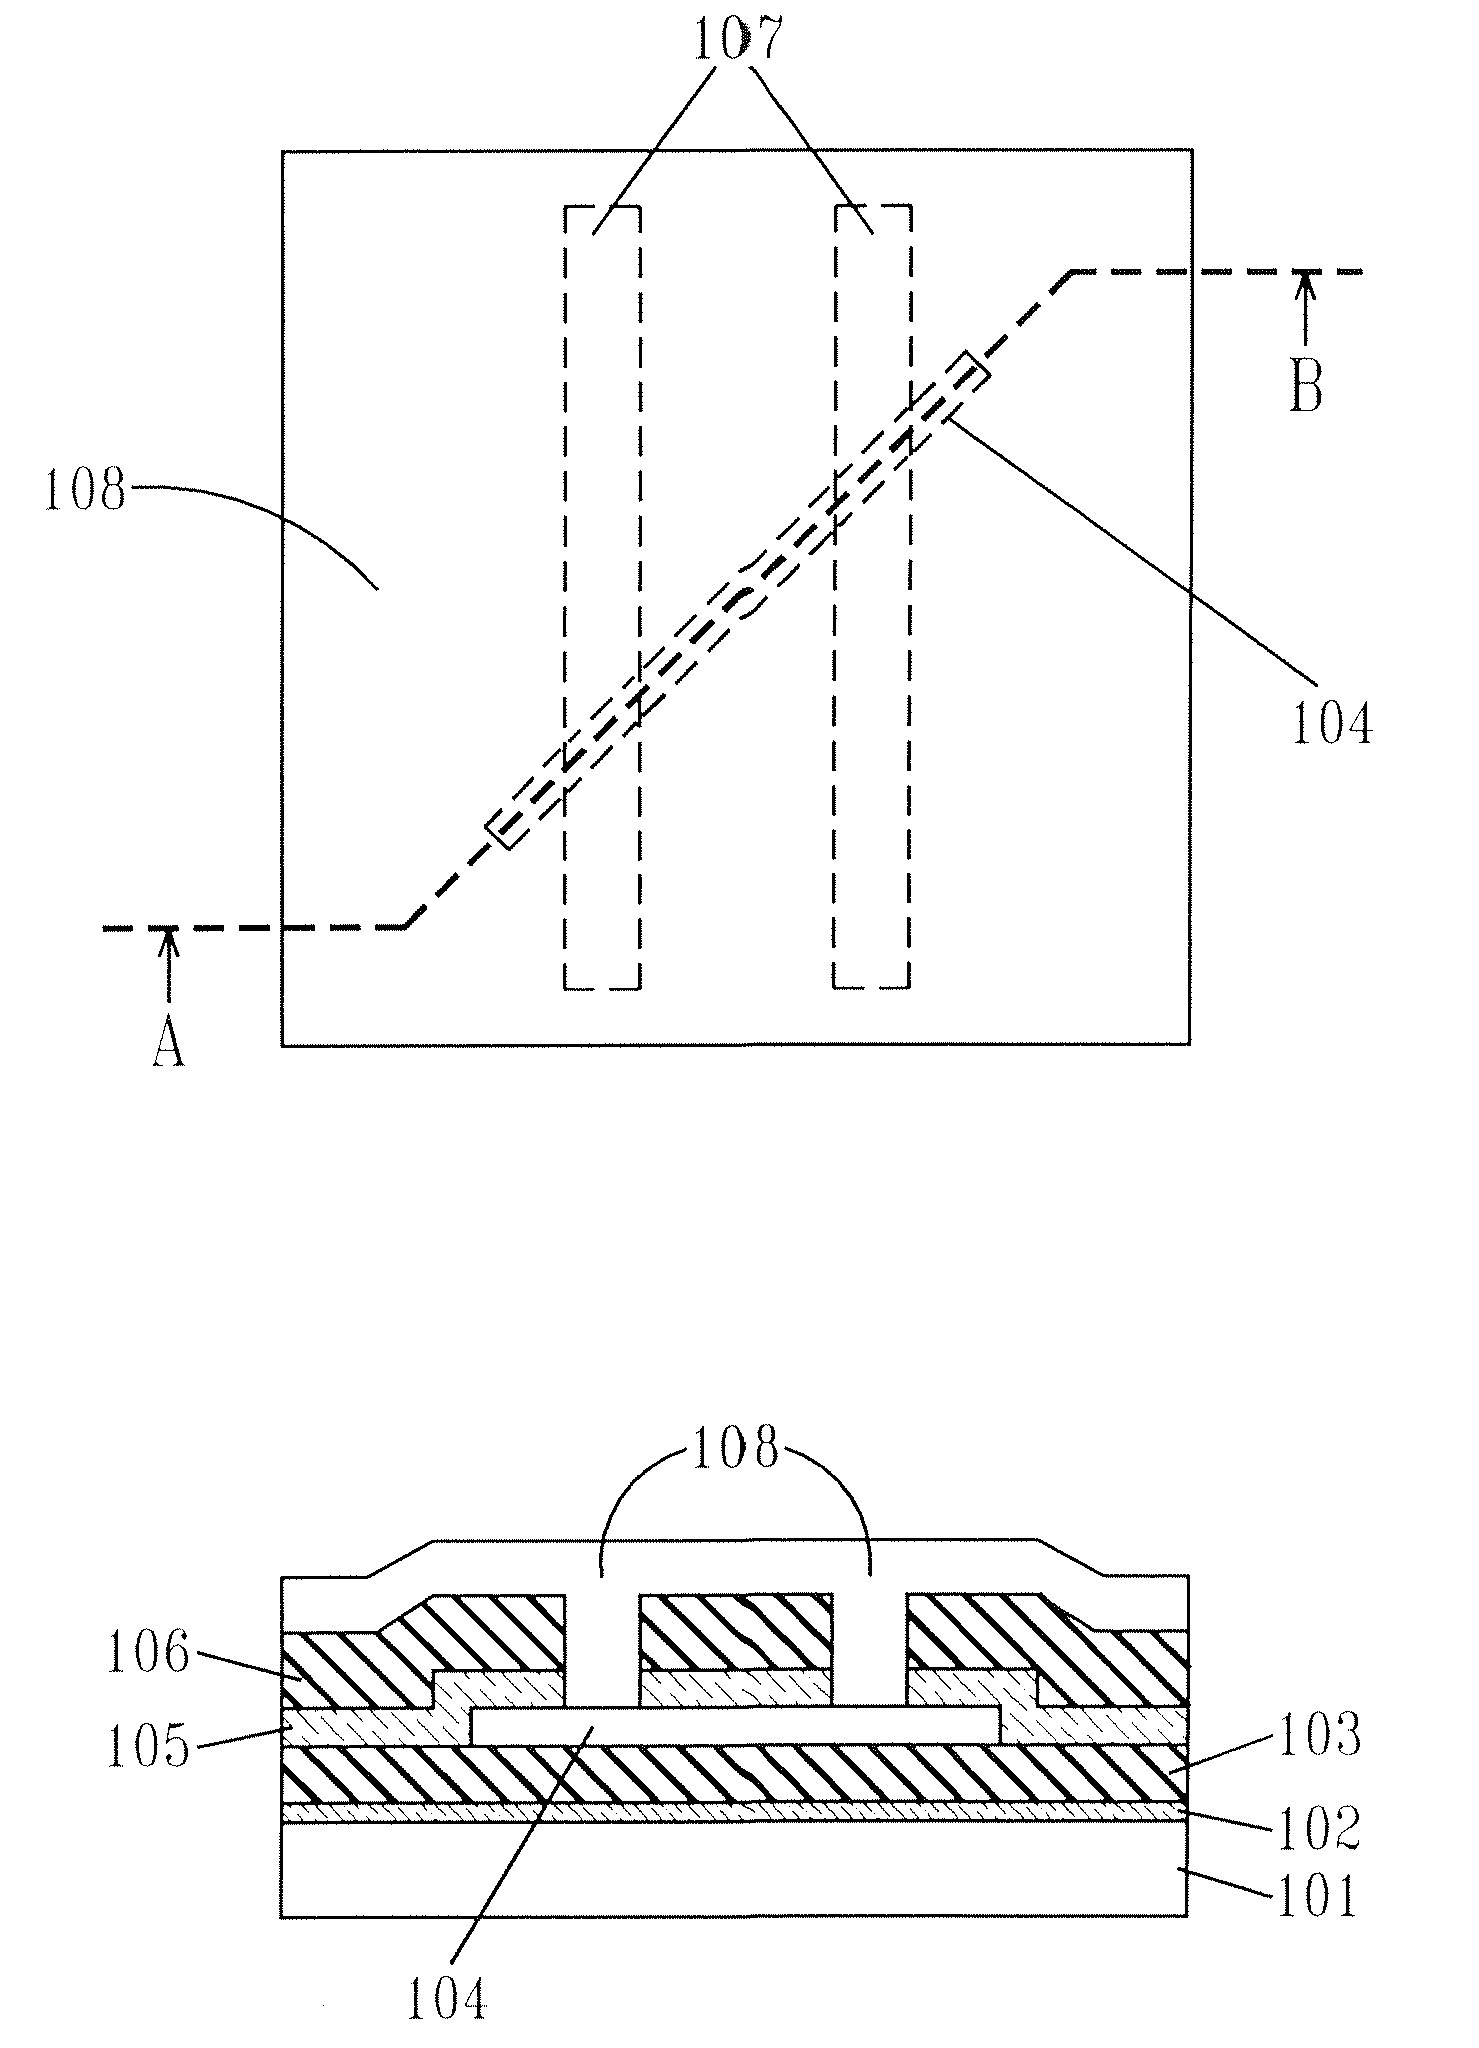 Nanowire MOSFET with doped epitaxial contacts for source and drain